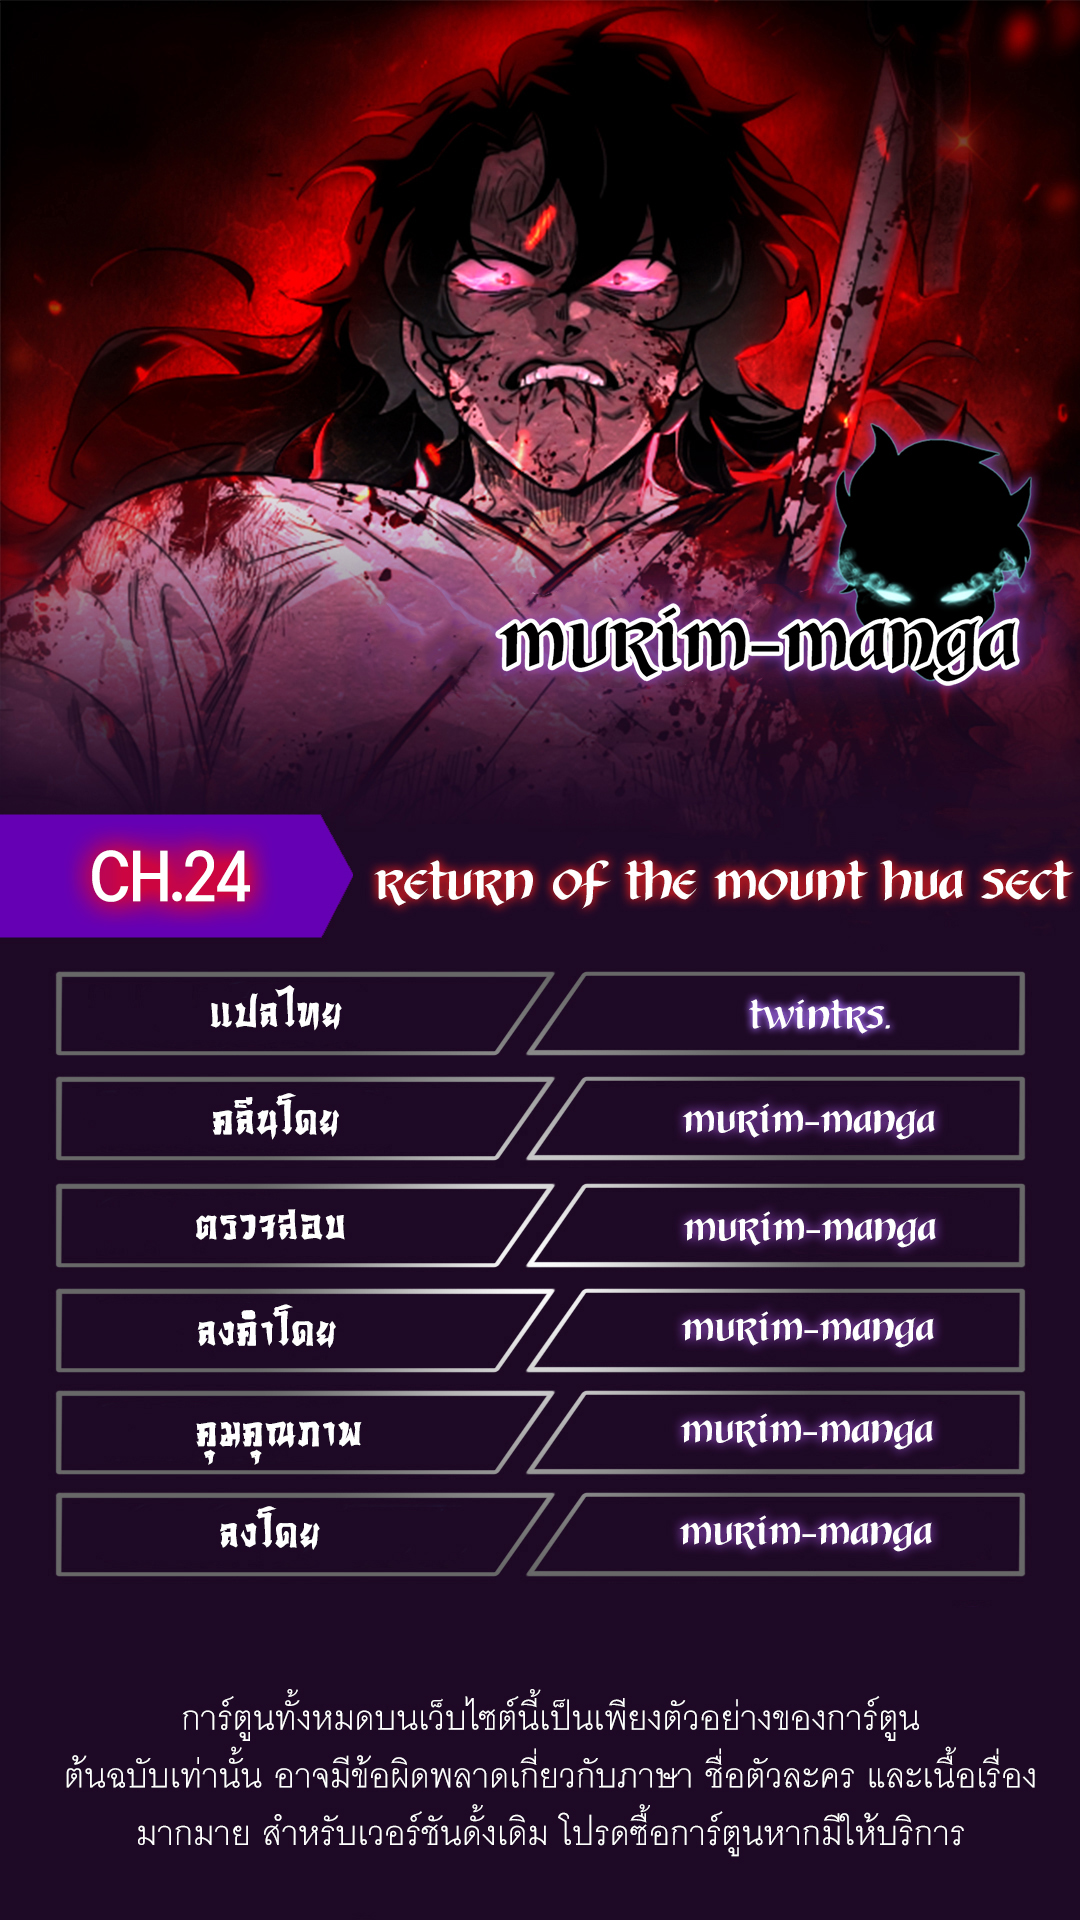 Return of the Flowery Mountain Sect 24 1